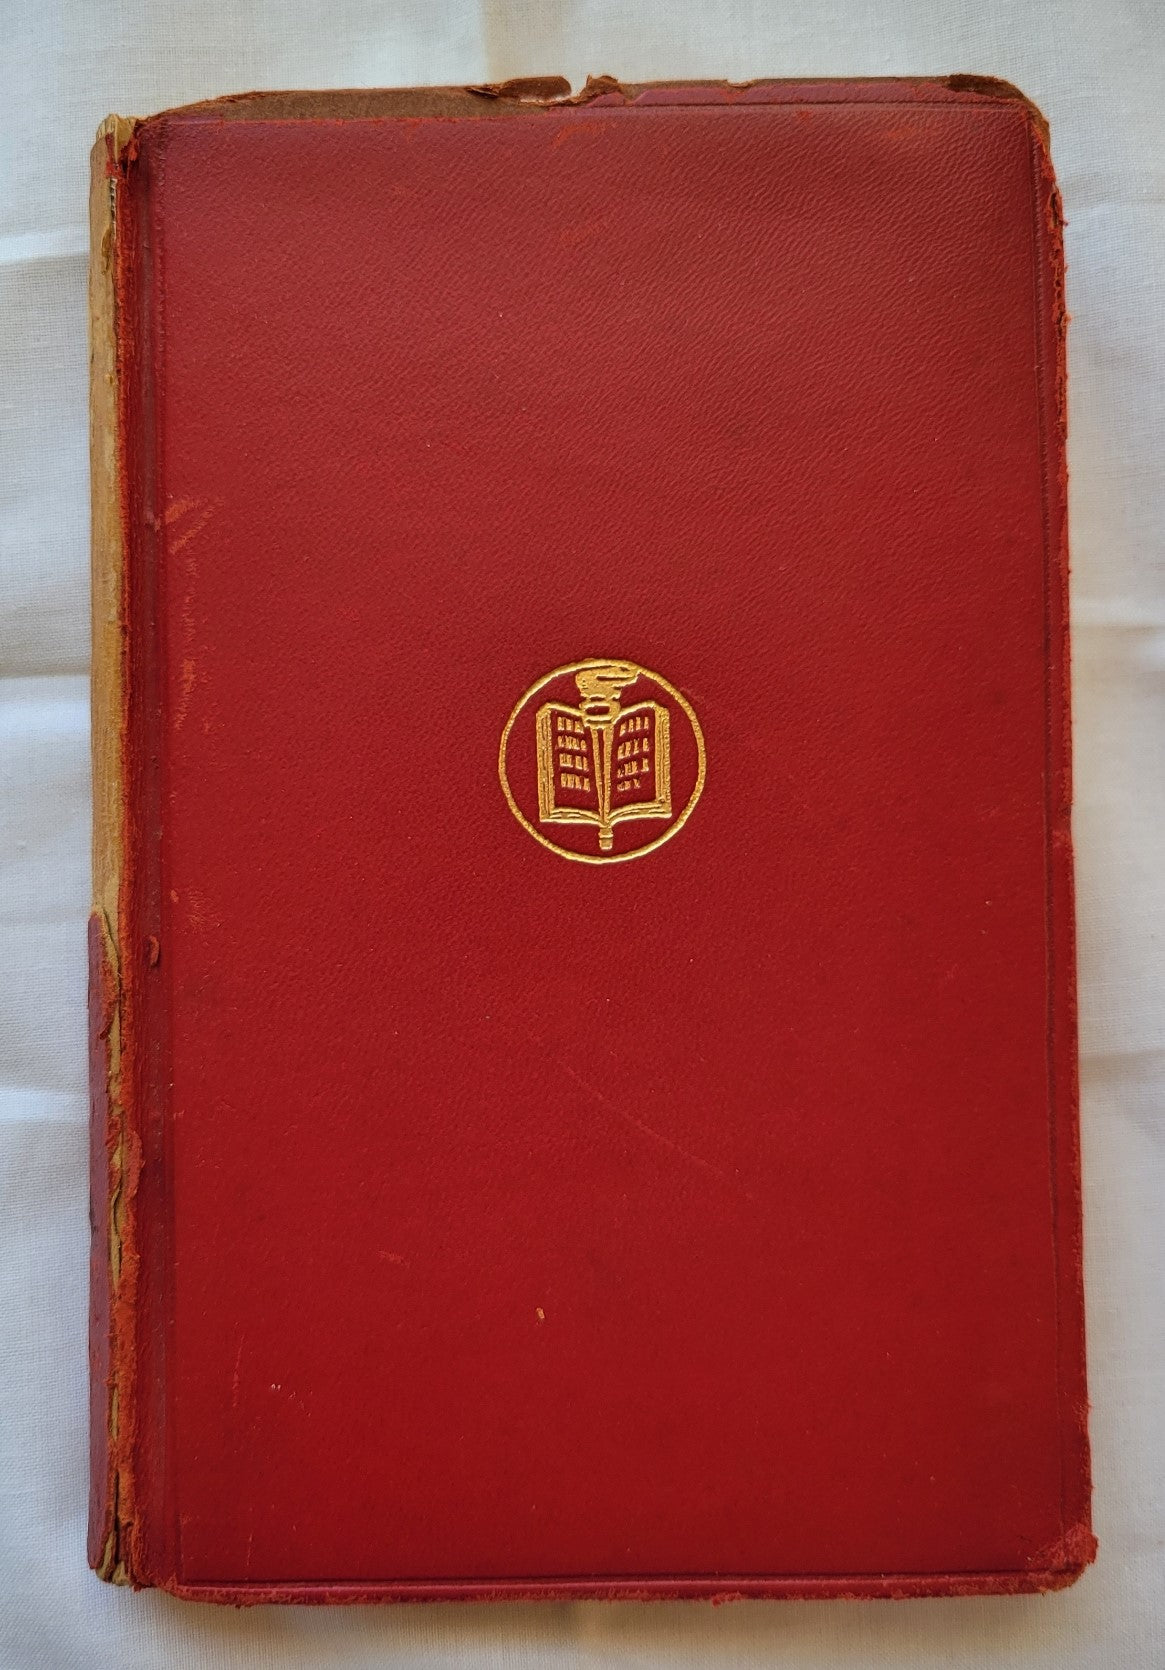 Antique book for sale, Homer's ancient Greek epic, The Odyssey translated by Alexander Pope, published by A. L. Burt Company (before 1932), with notes from Rev. Theodore Alois Buckley M.A. View of front cover.